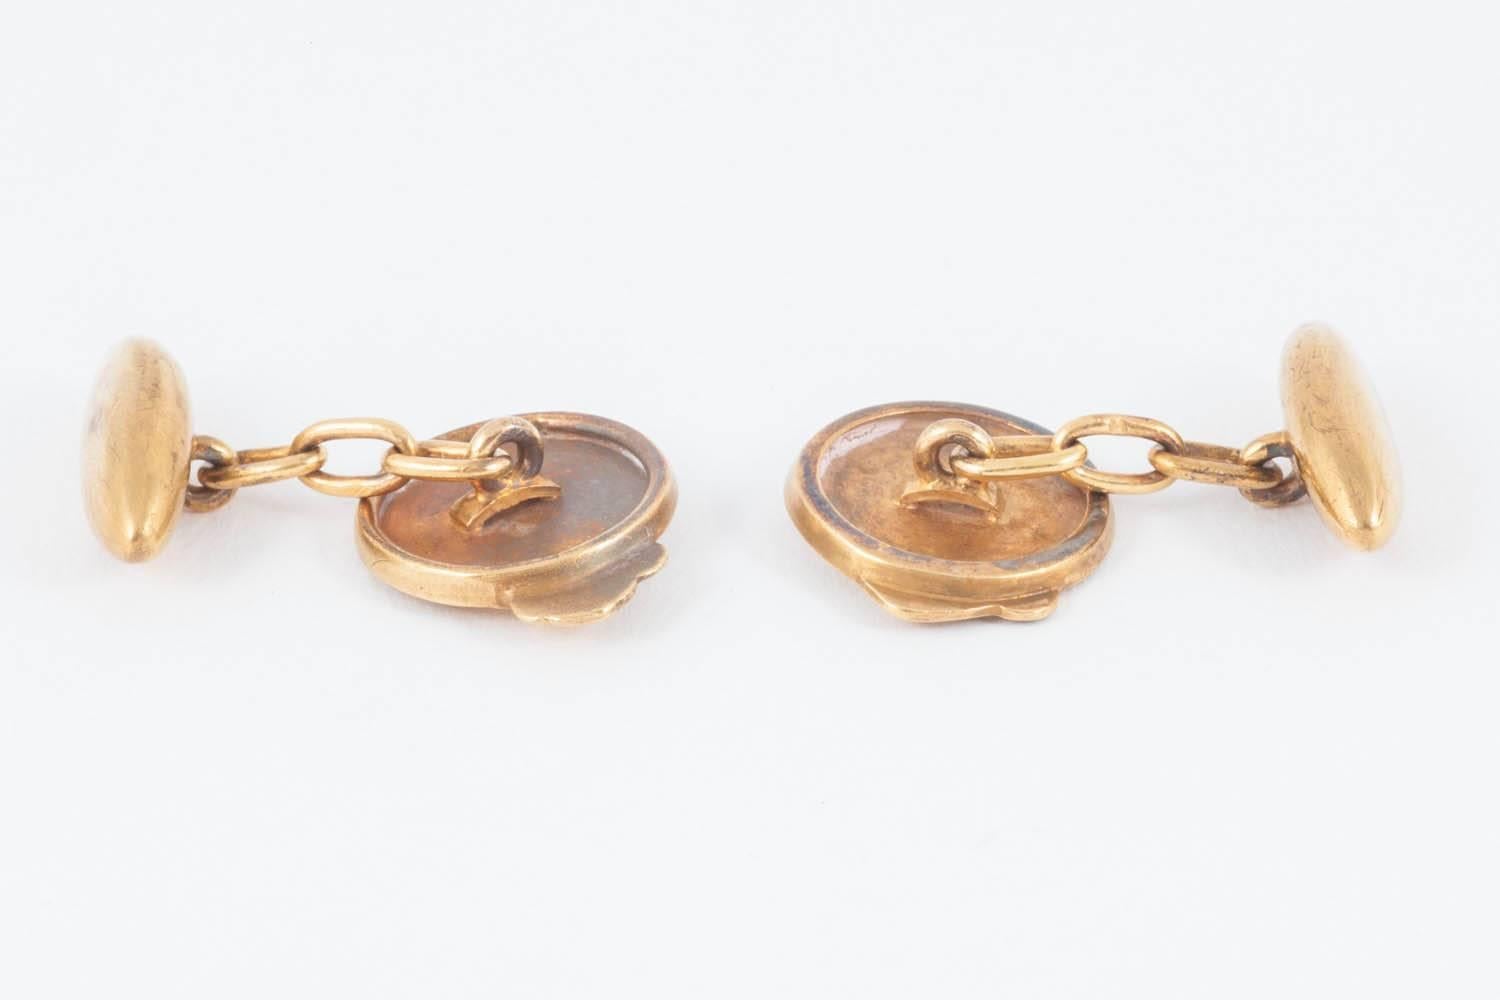  Art Nouveau Cufflinks by Jules Cheret in 18 Karat Gold, French circa 1890  For Sale 1